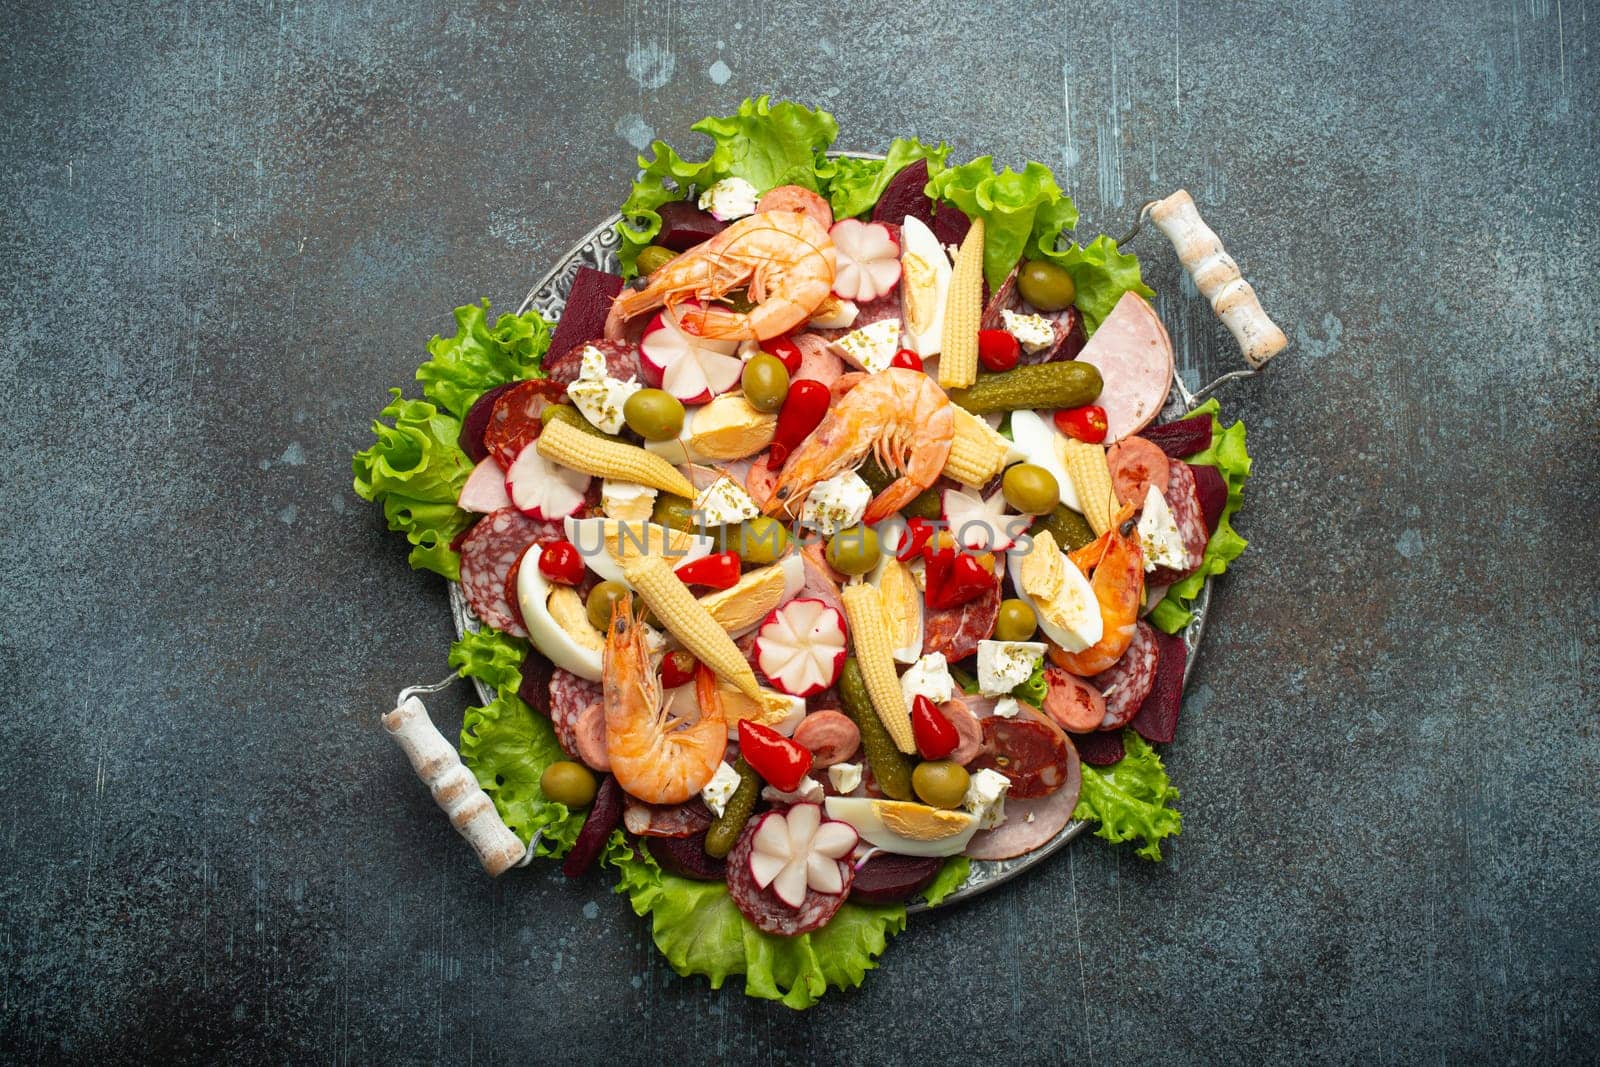 Fiambre, salad of Guatemala, Mexico and Latin America, on large plate top view white wooden background top view with cold cuts, shrimps. Festive dish for All Saints Day (Day Of The Dead) celebration.